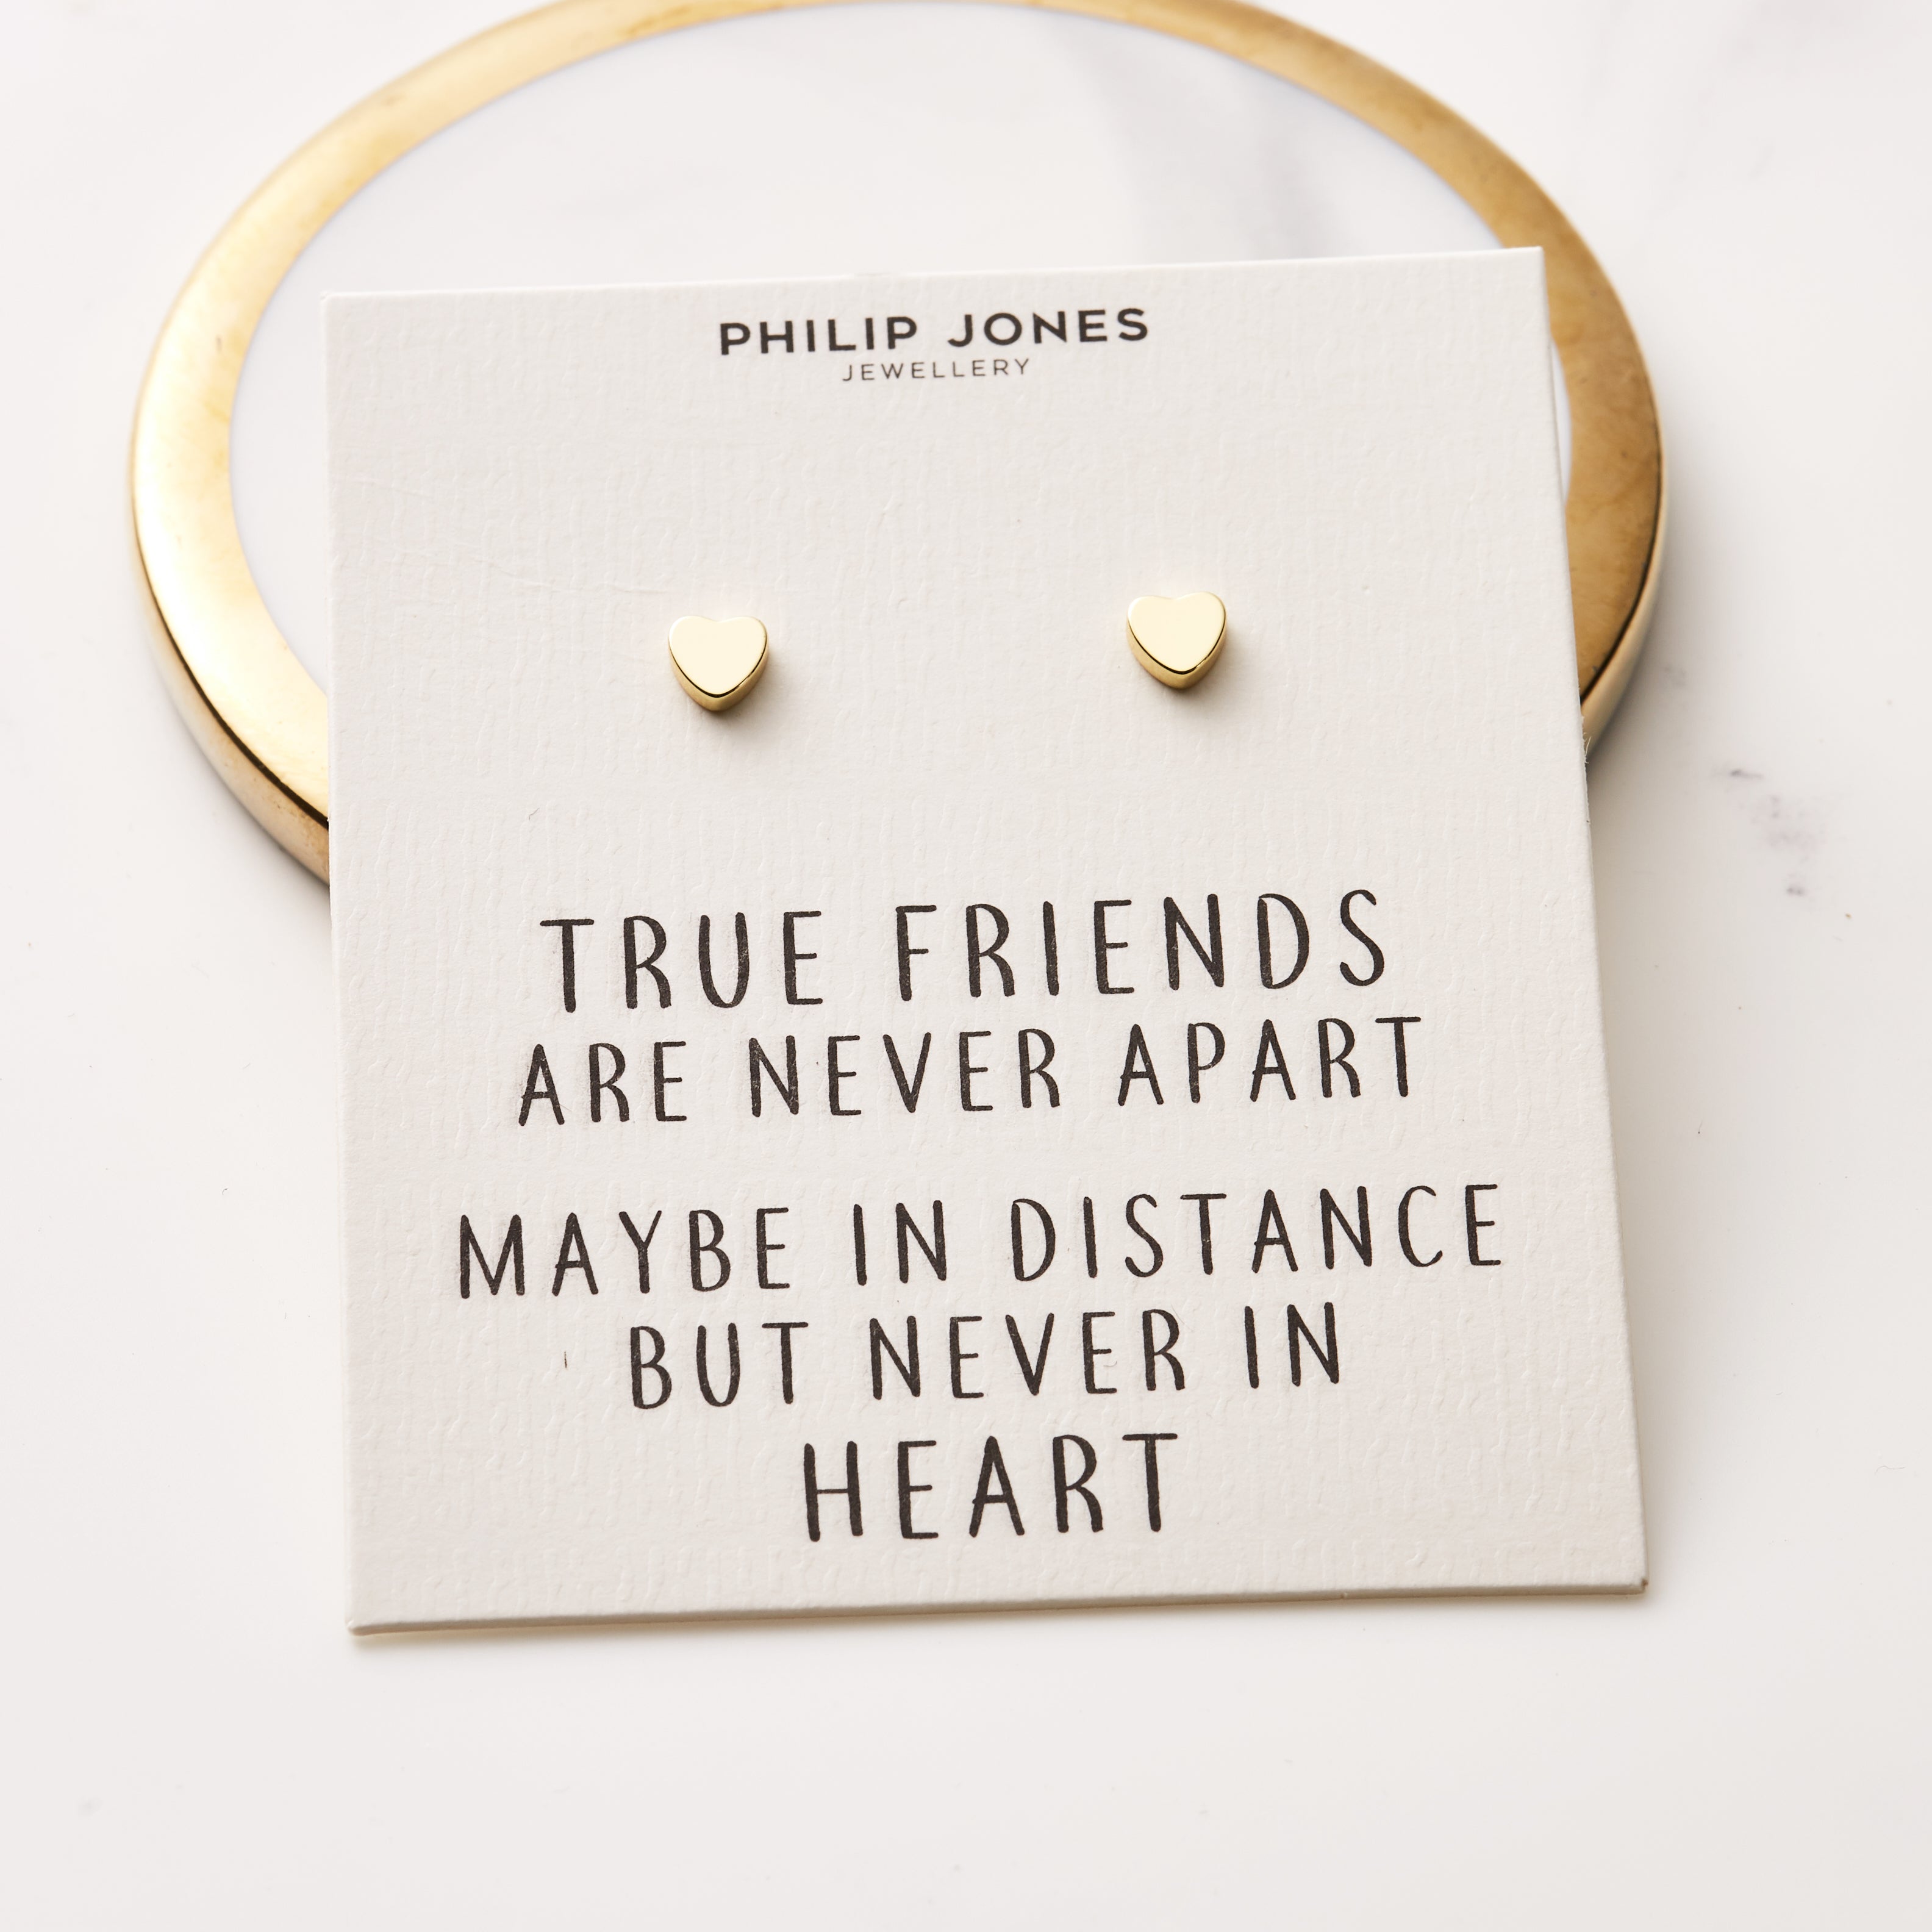 Gold Plated Heart Stud Earrings with Quote Card